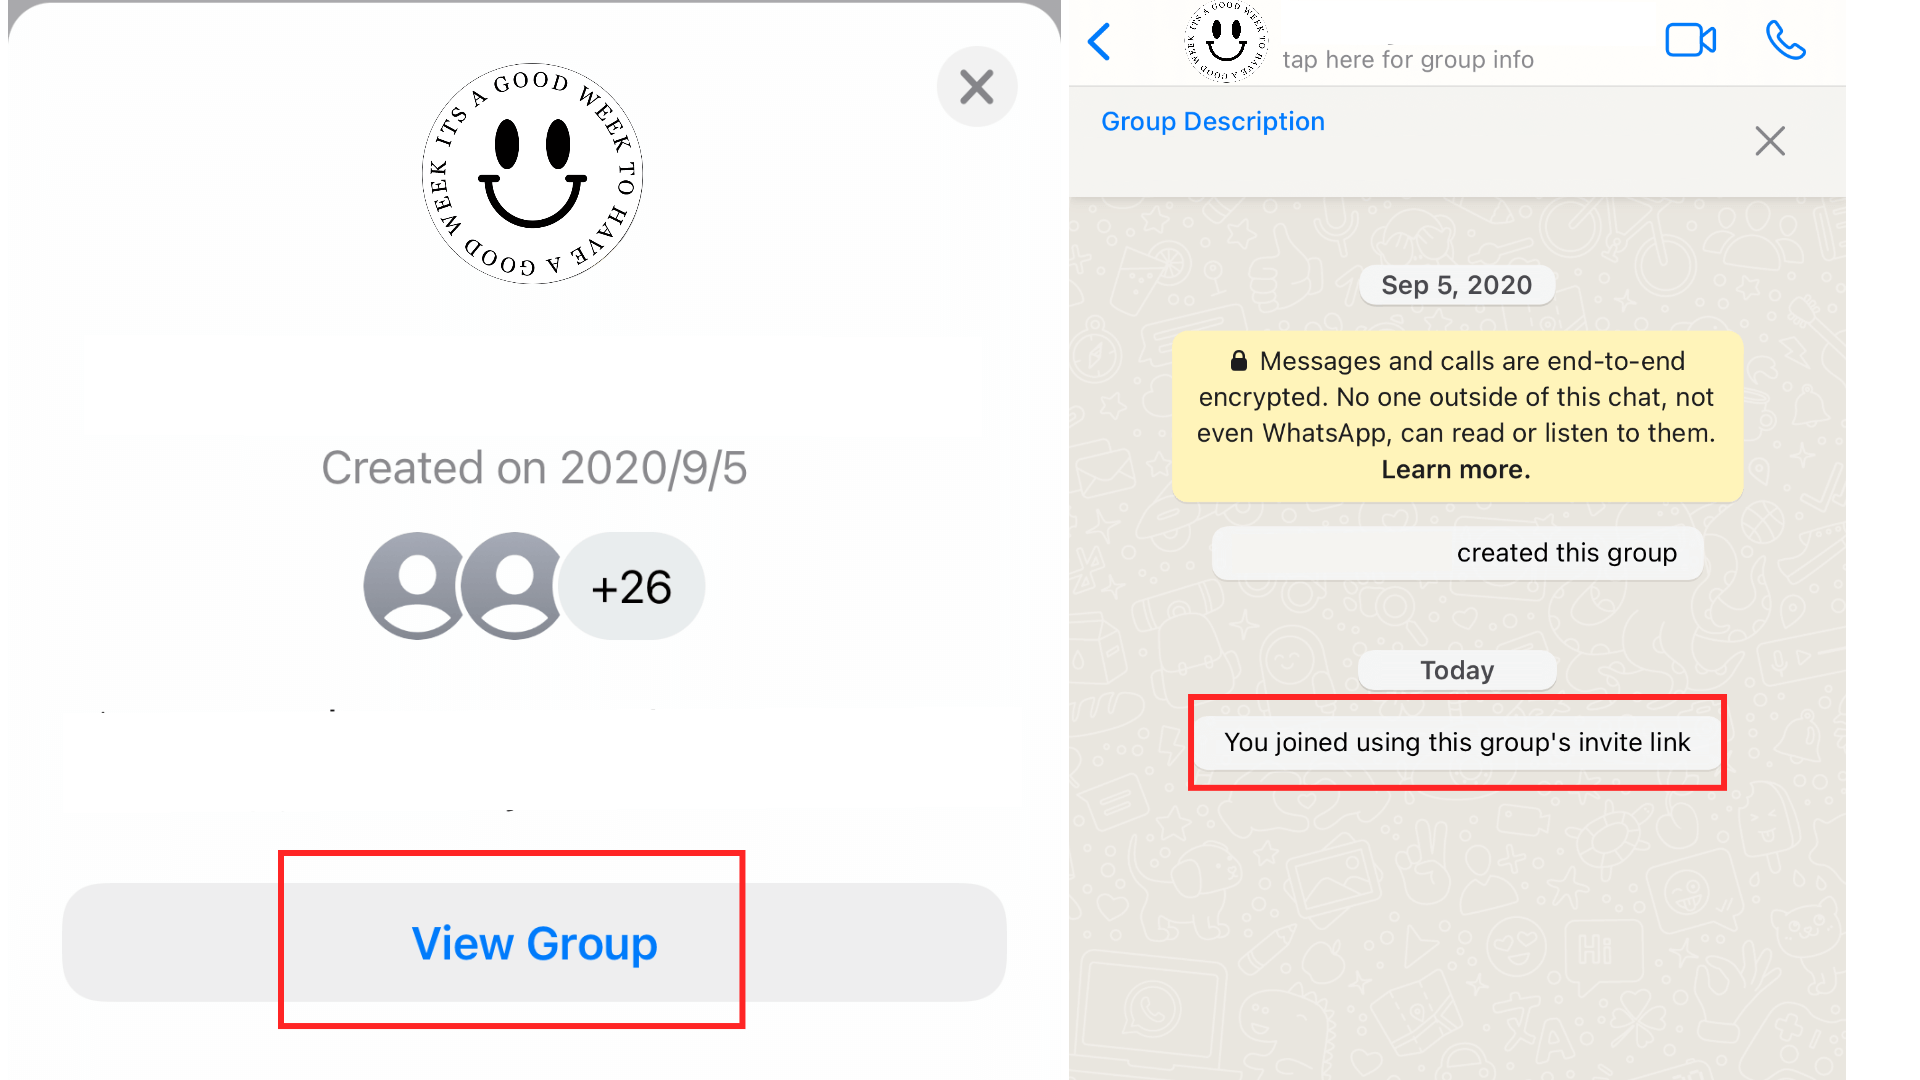 tap view group to view gay chat whatsapp group